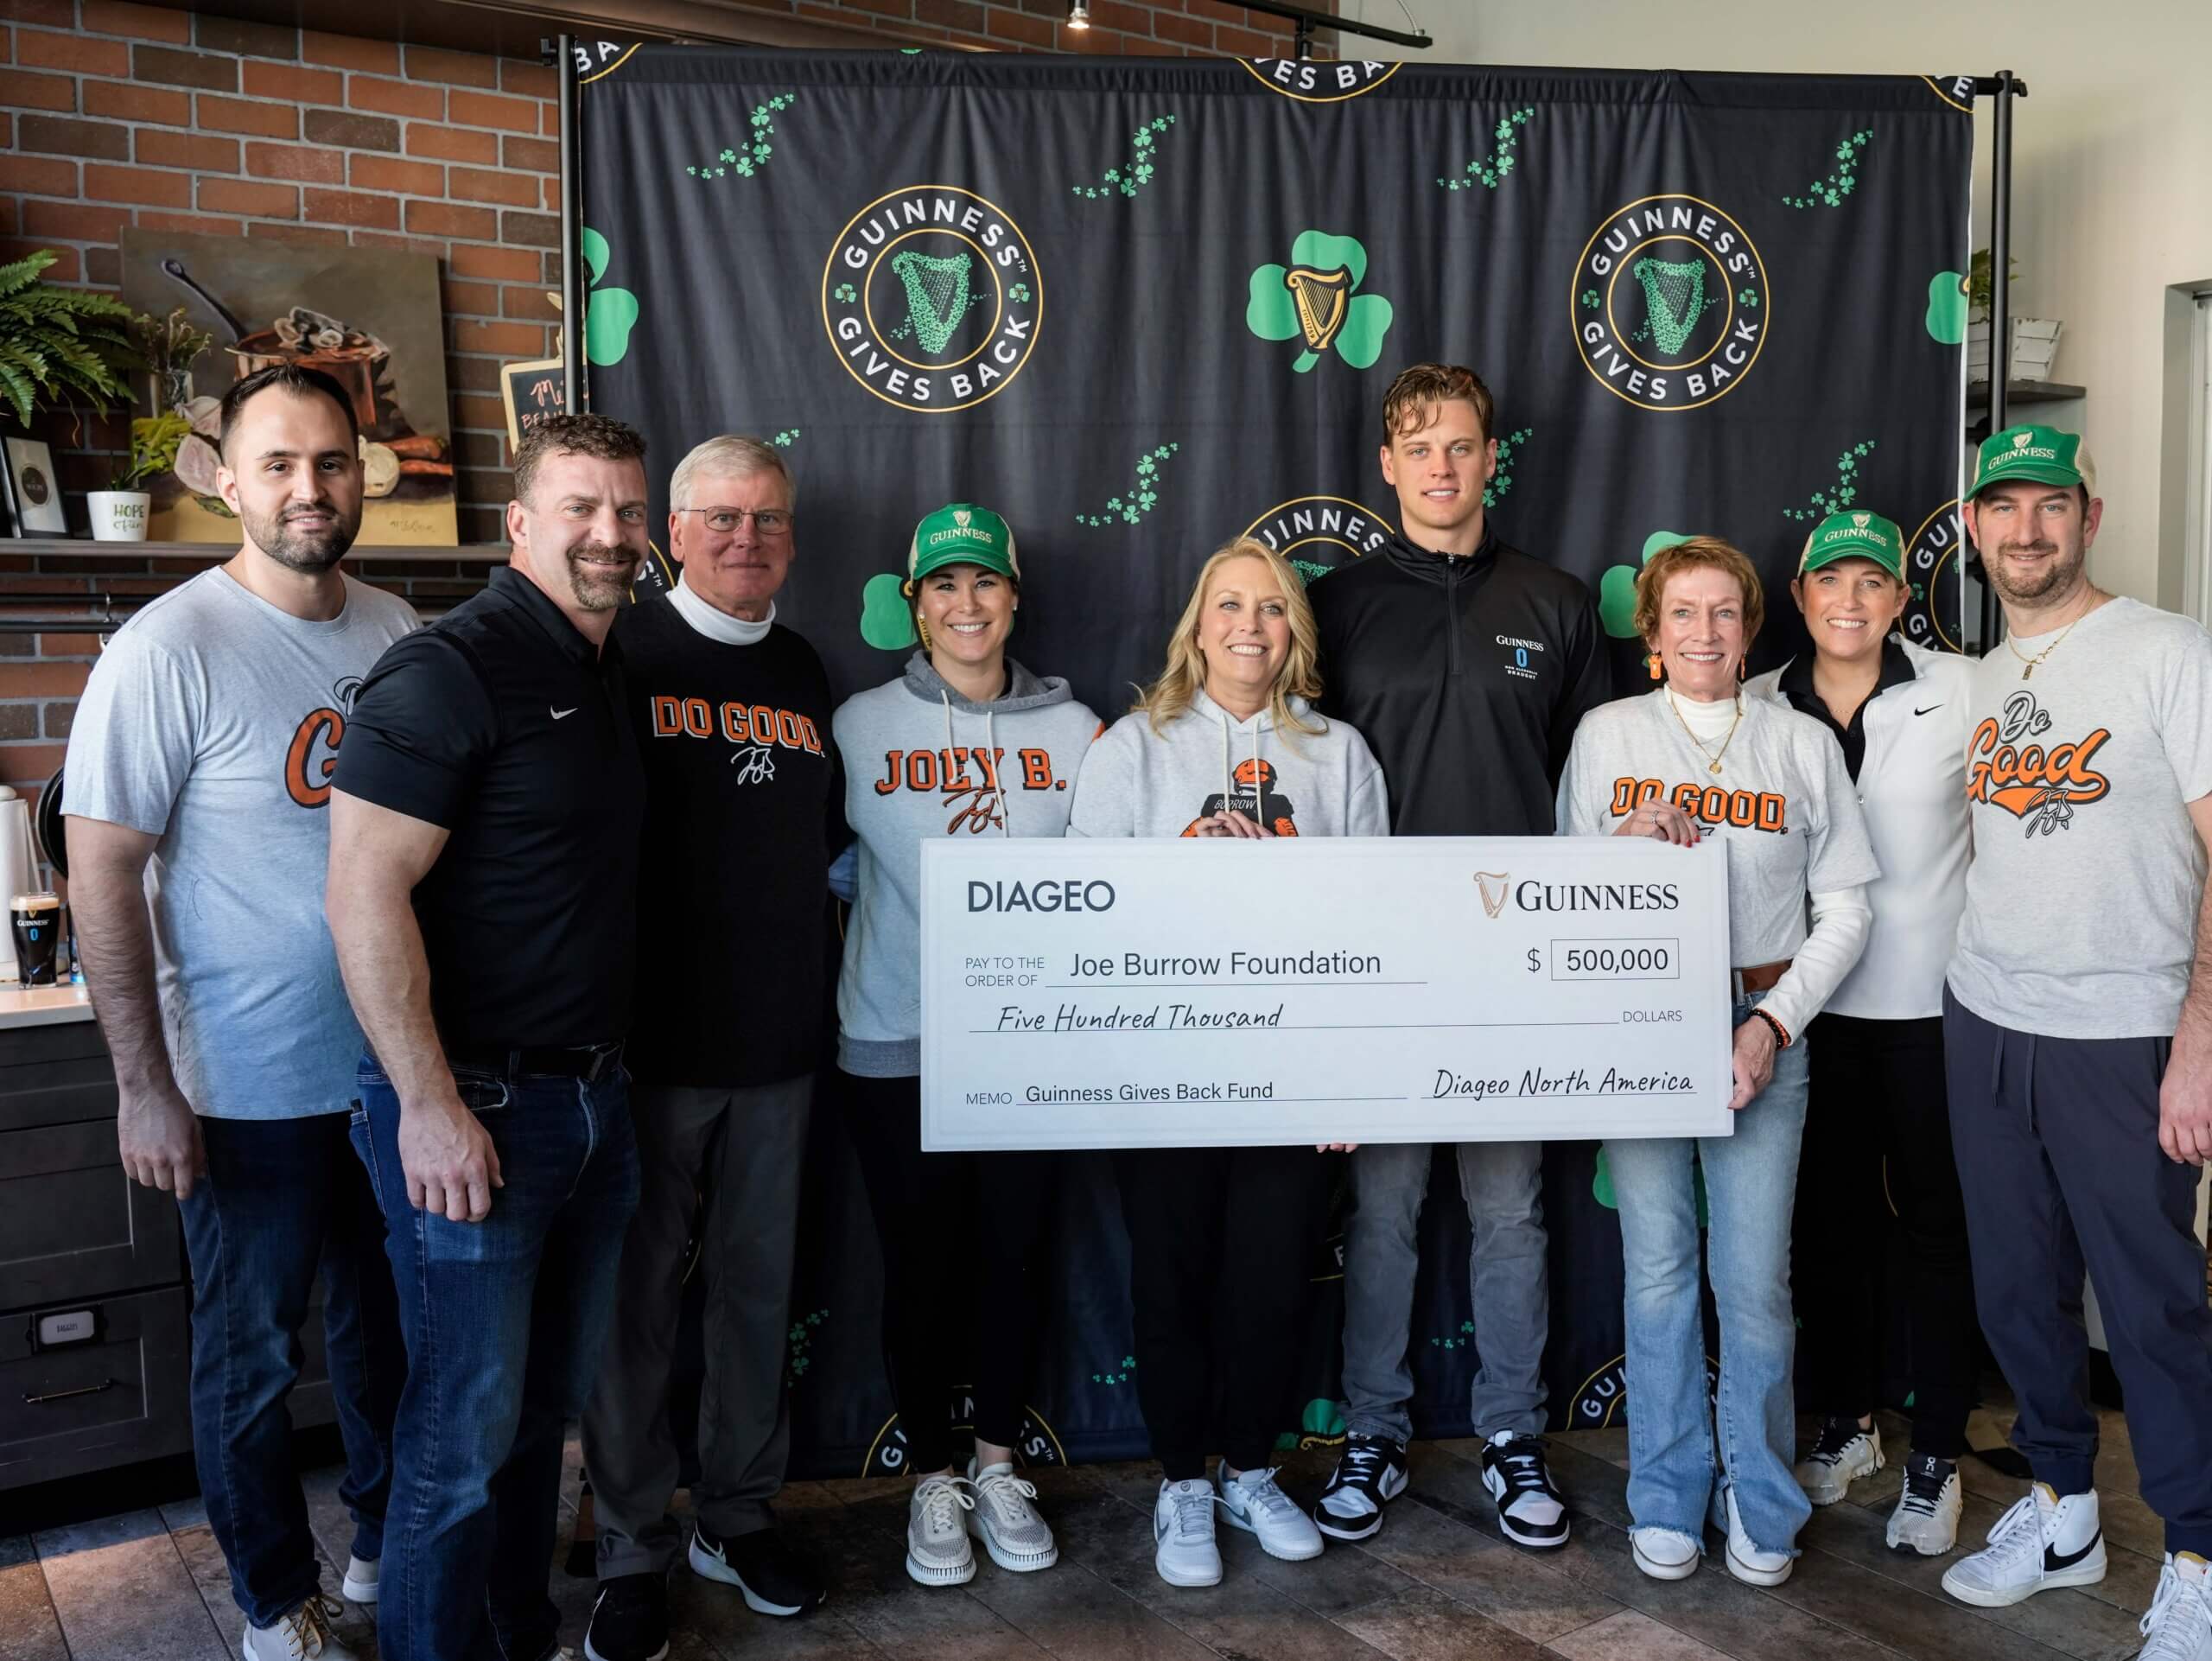 Joe Burrow Foundation receives $500,000 donation from Guinness Gives Back event